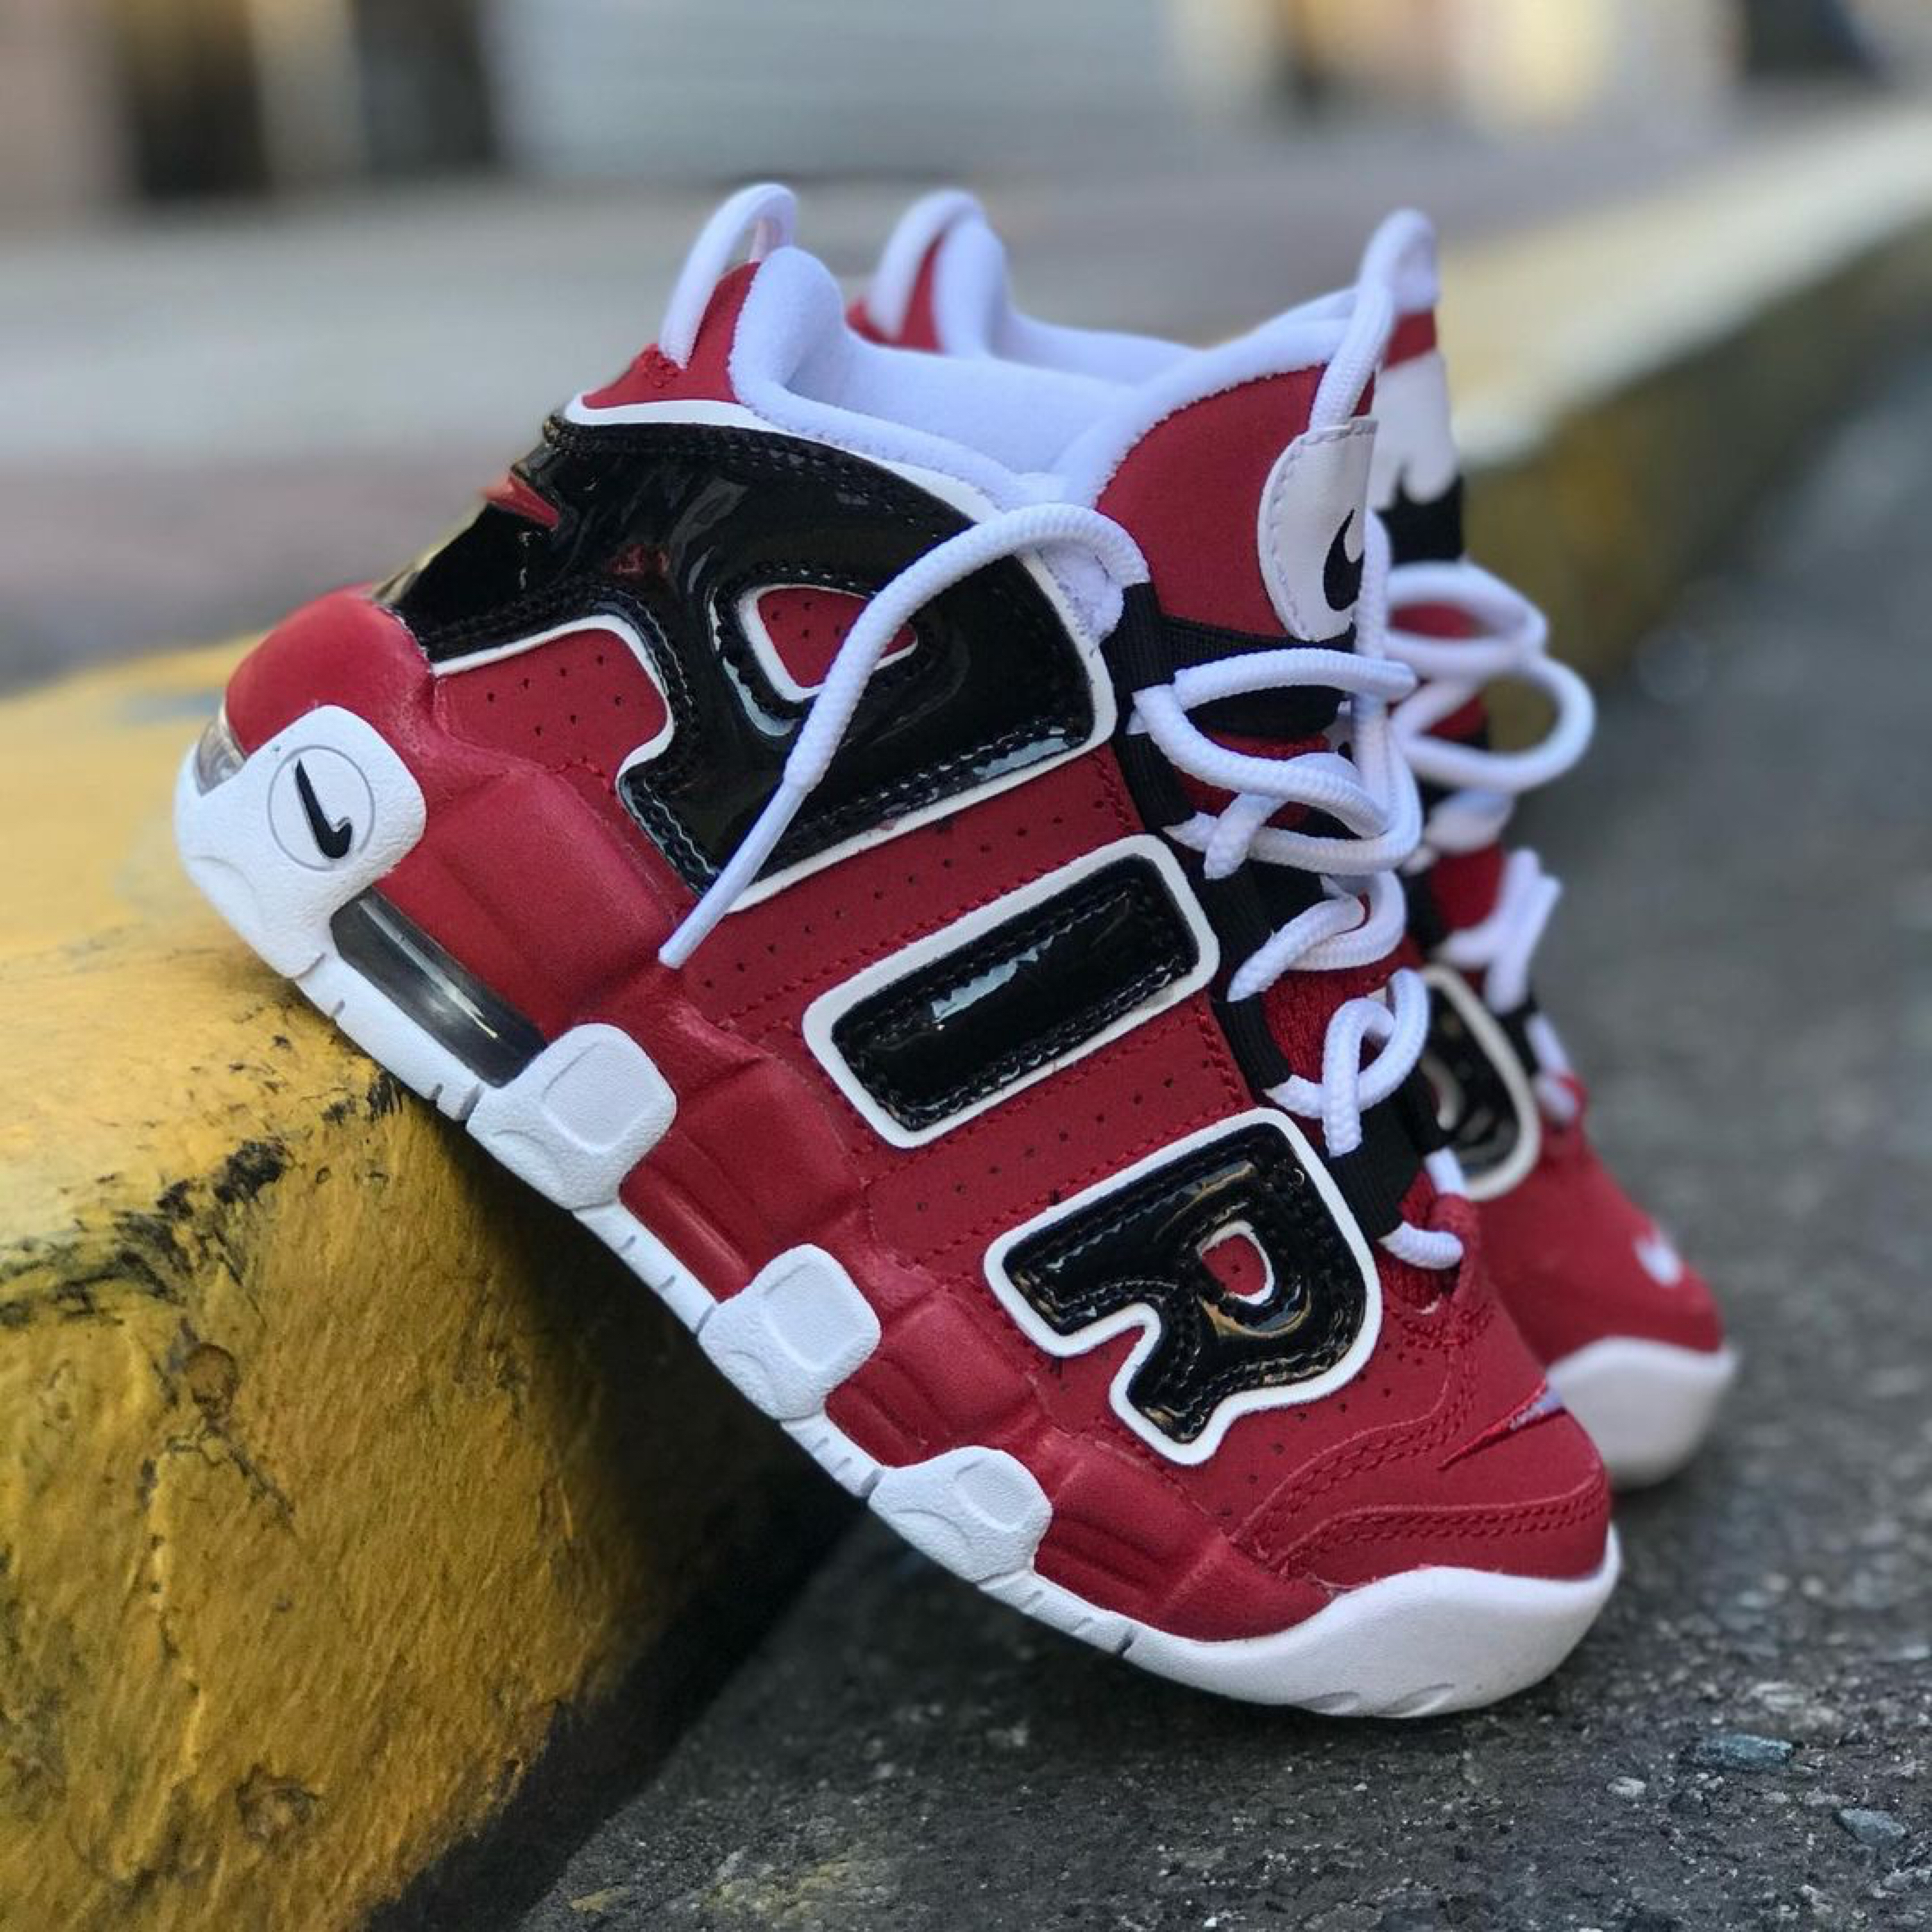 The Nike Air More Uptempo Black and Varsity Red Makes a Comeback